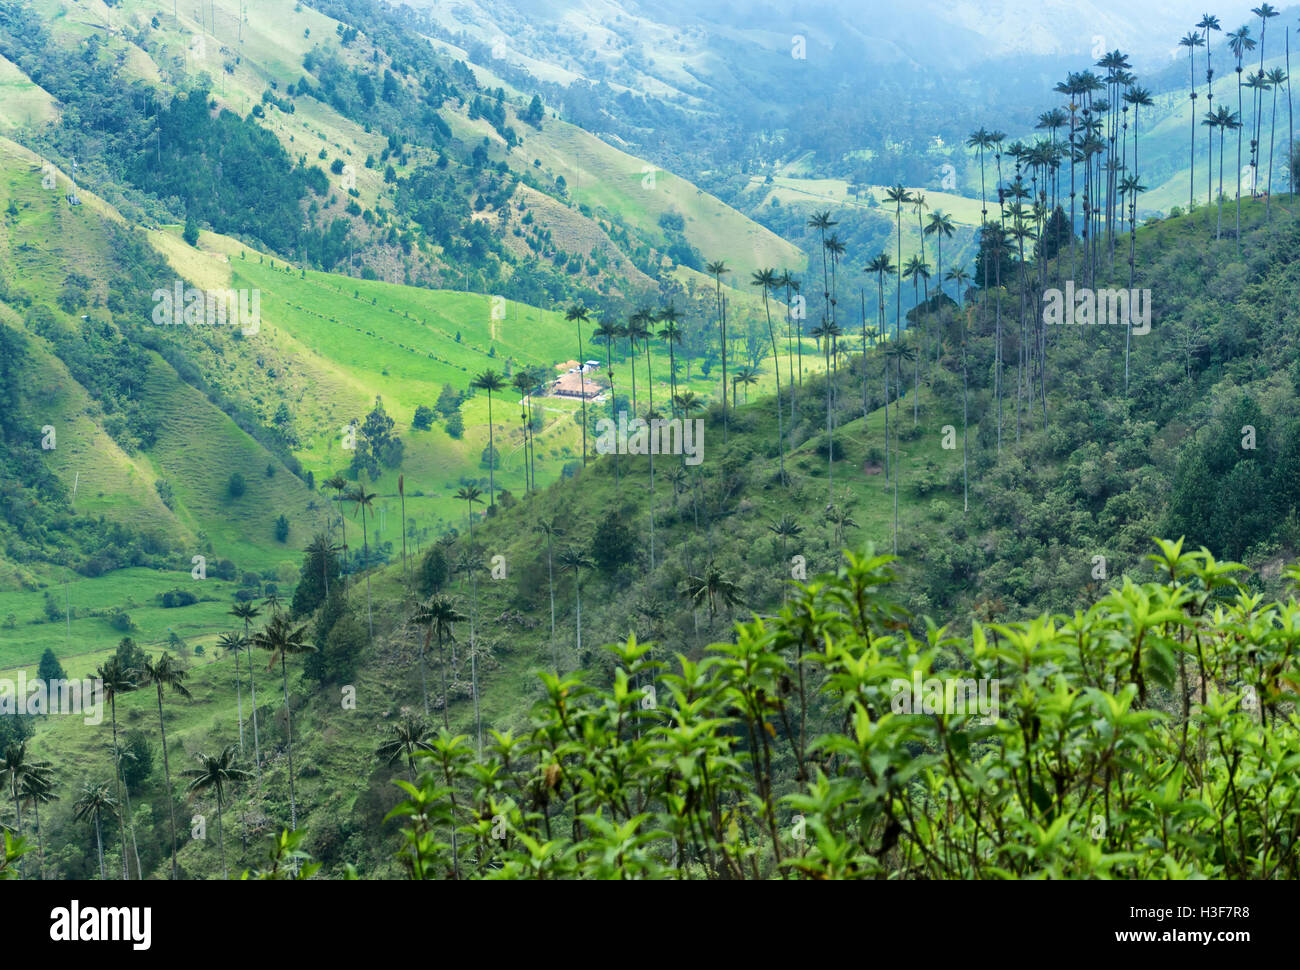 Landscape of wax palm trees in Cocora Valley near Salento, Colombia Stock Photo